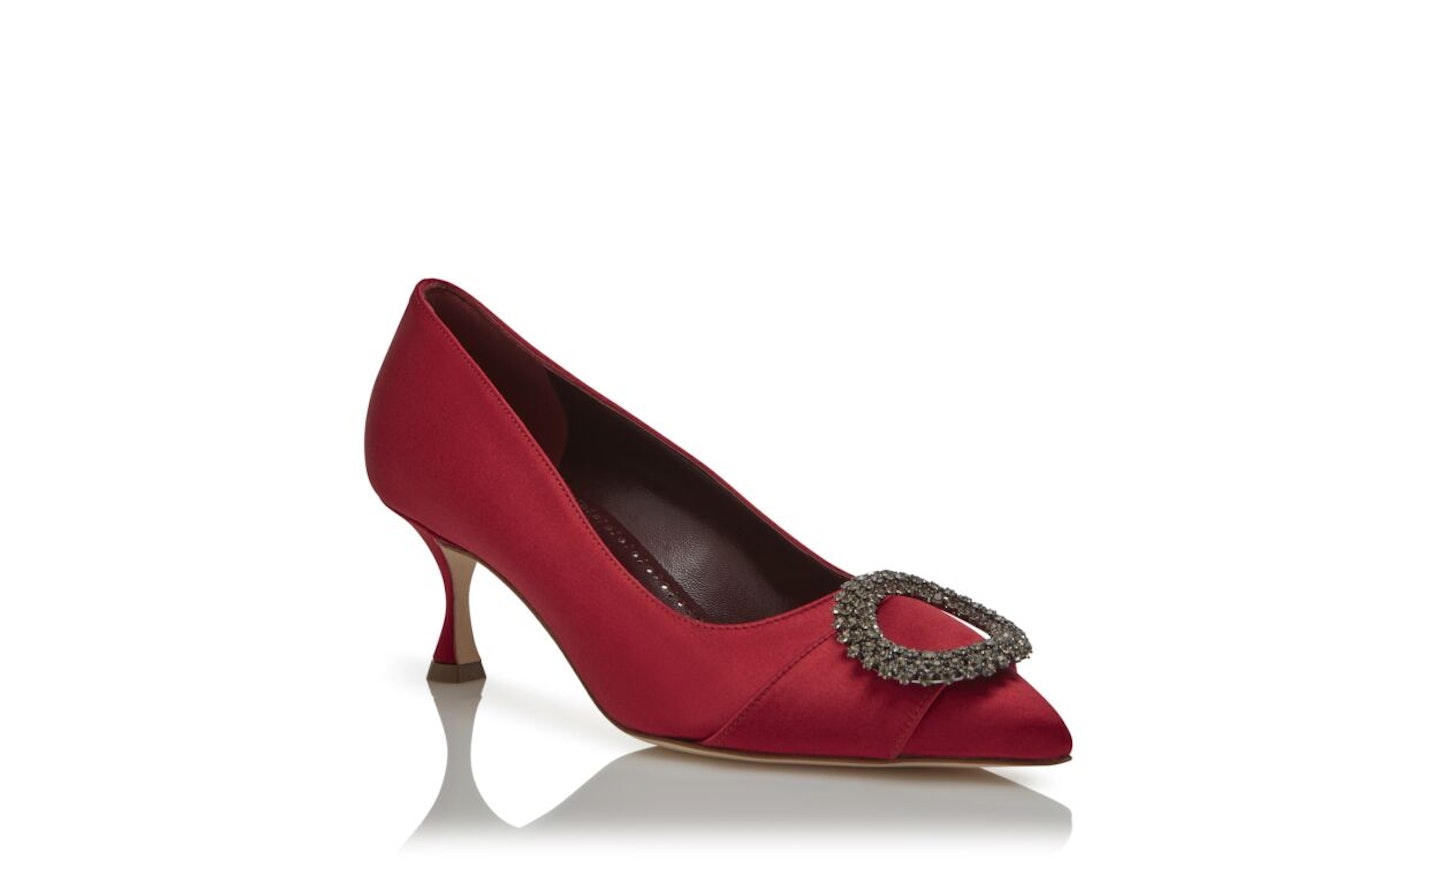 Bright Red Satin Crystal Buckle Pumps, WERE £835 NOW £501